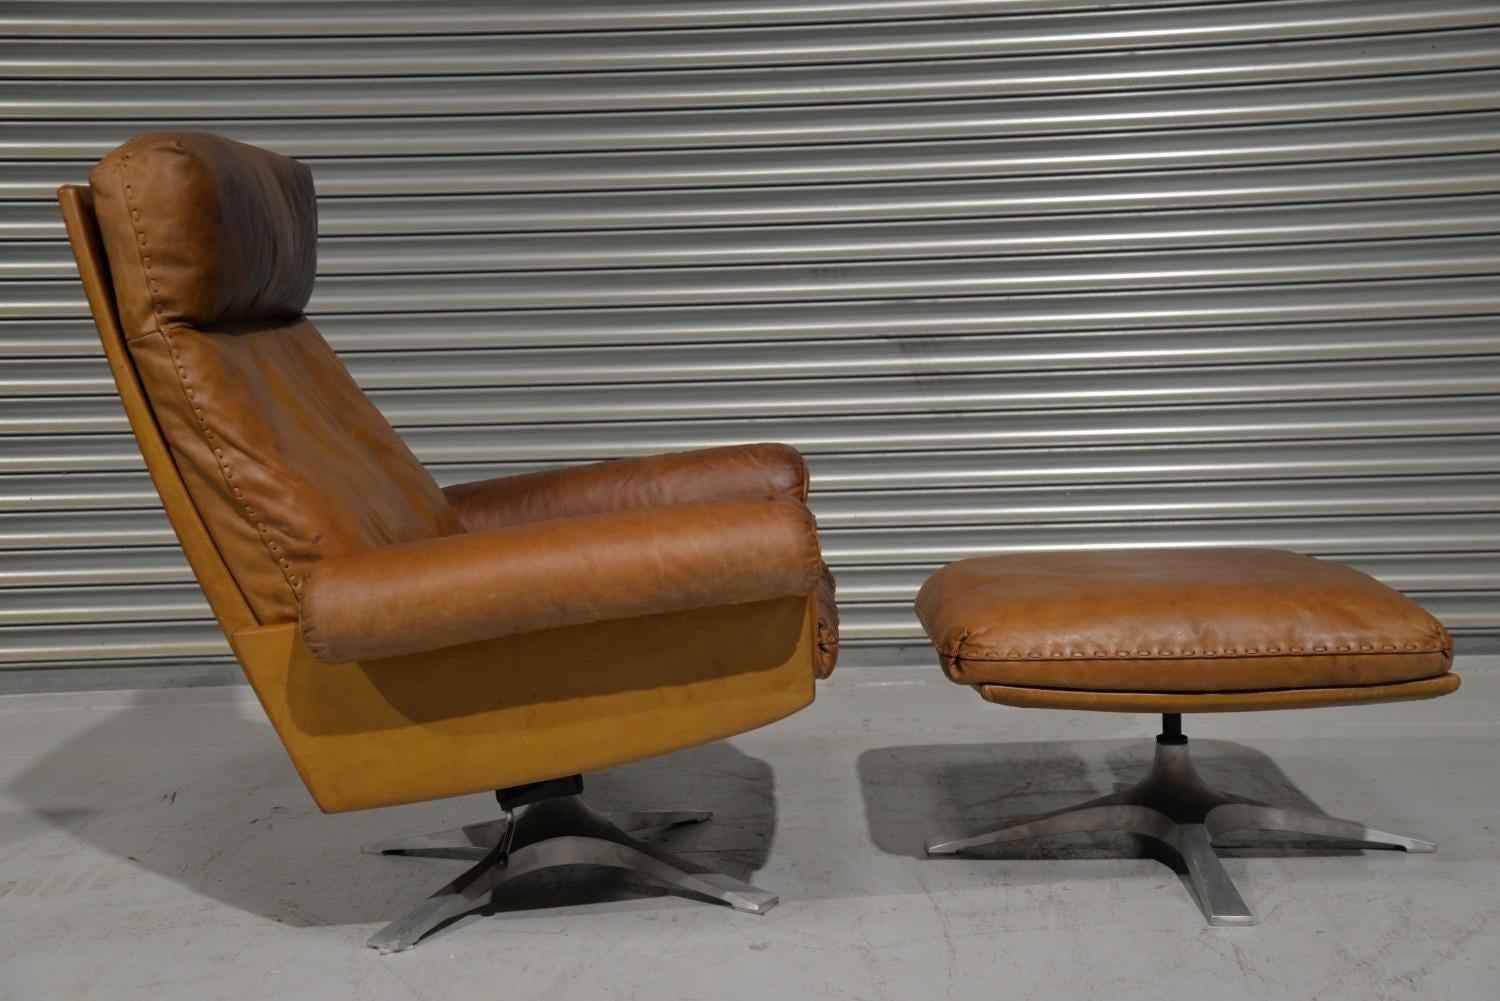 Swiss Vintage De Sede DS 31 Leather Swivel Armchair with Ottoman, Switzerland, 1970s For Sale